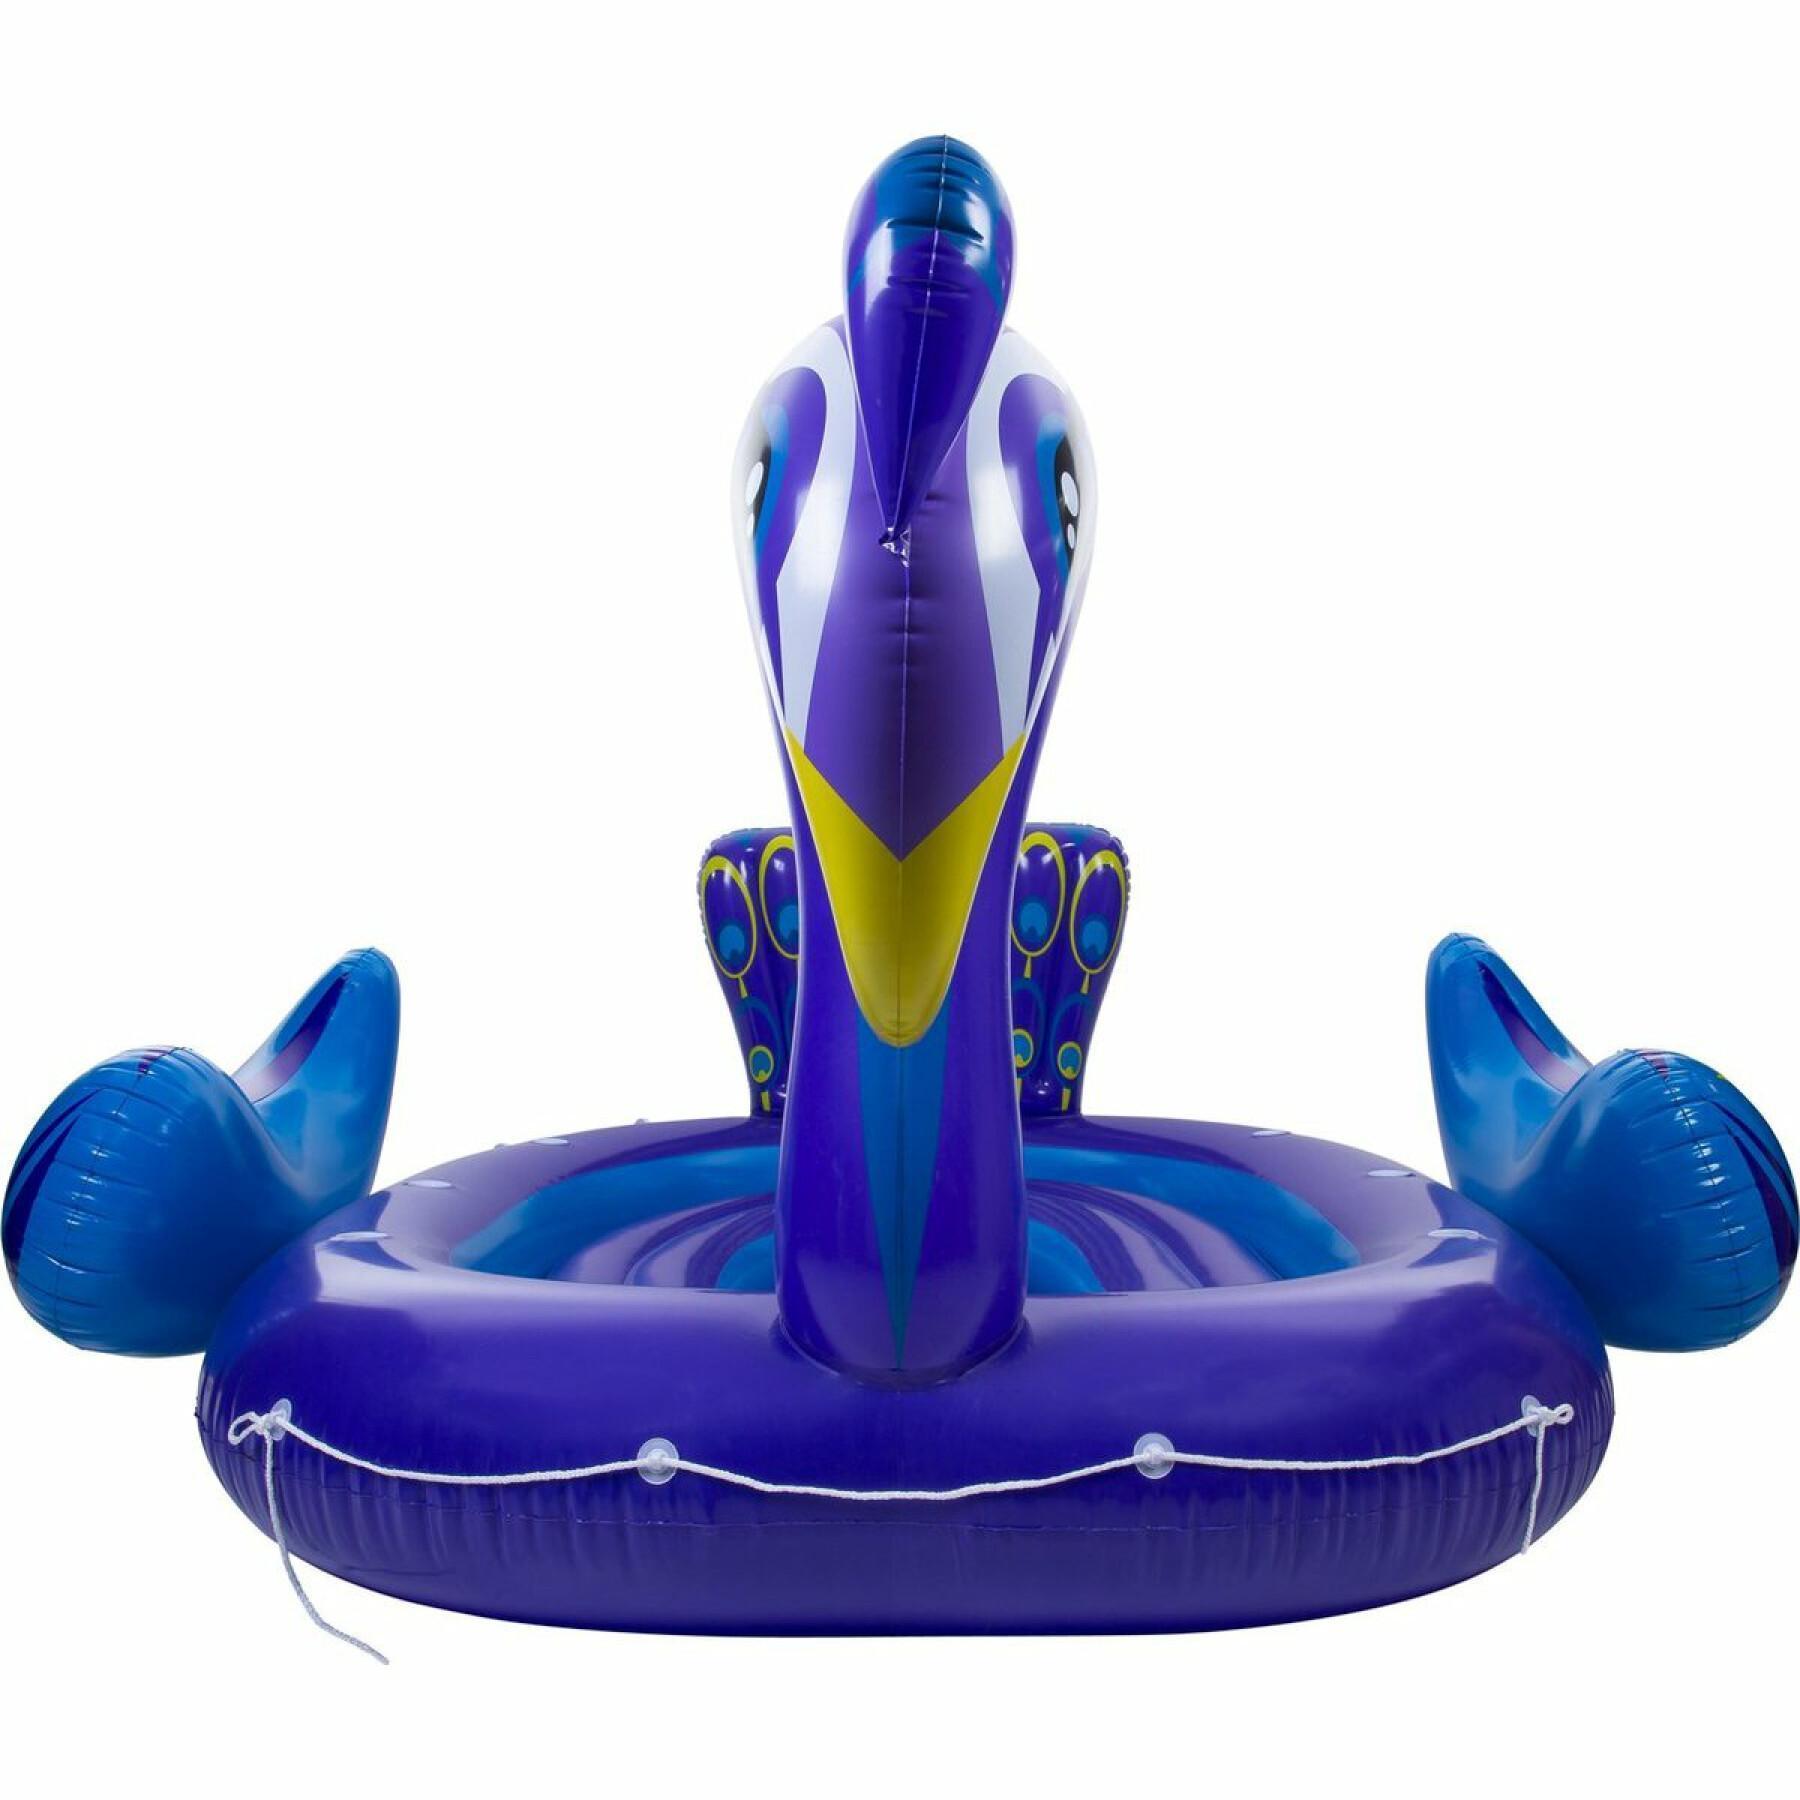 Inflatable boat the Pure4Fun Paon